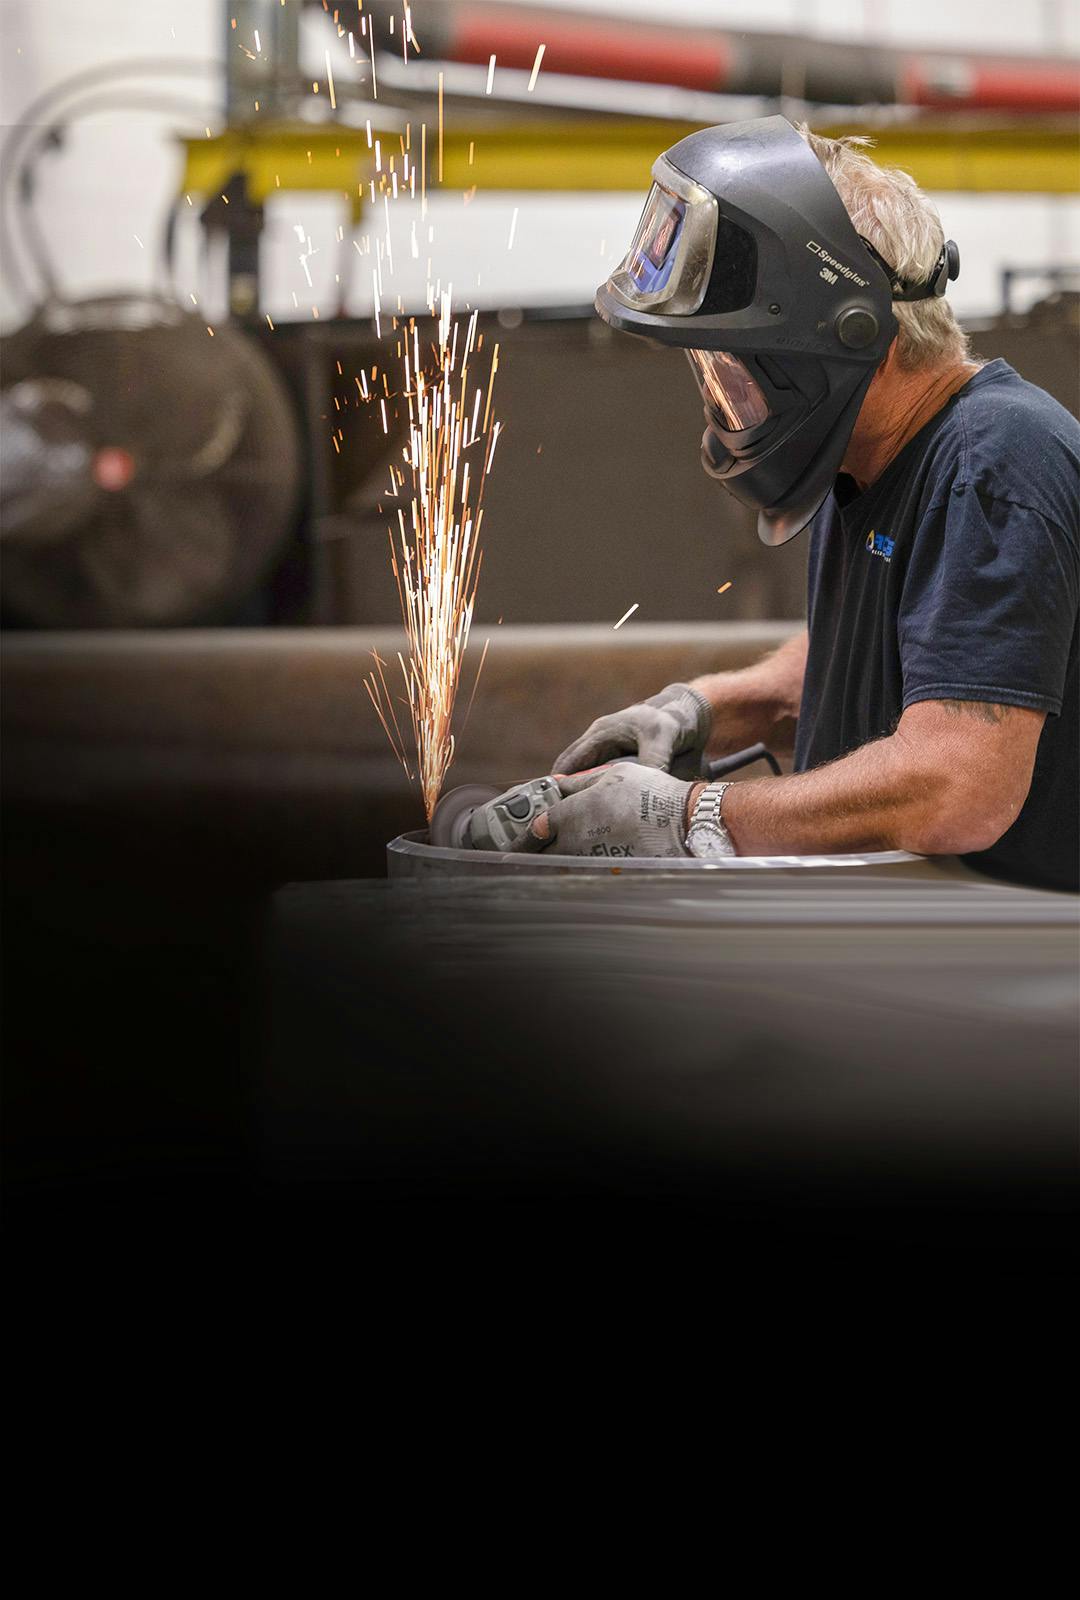 Man welding metal and sparks flying in work shop